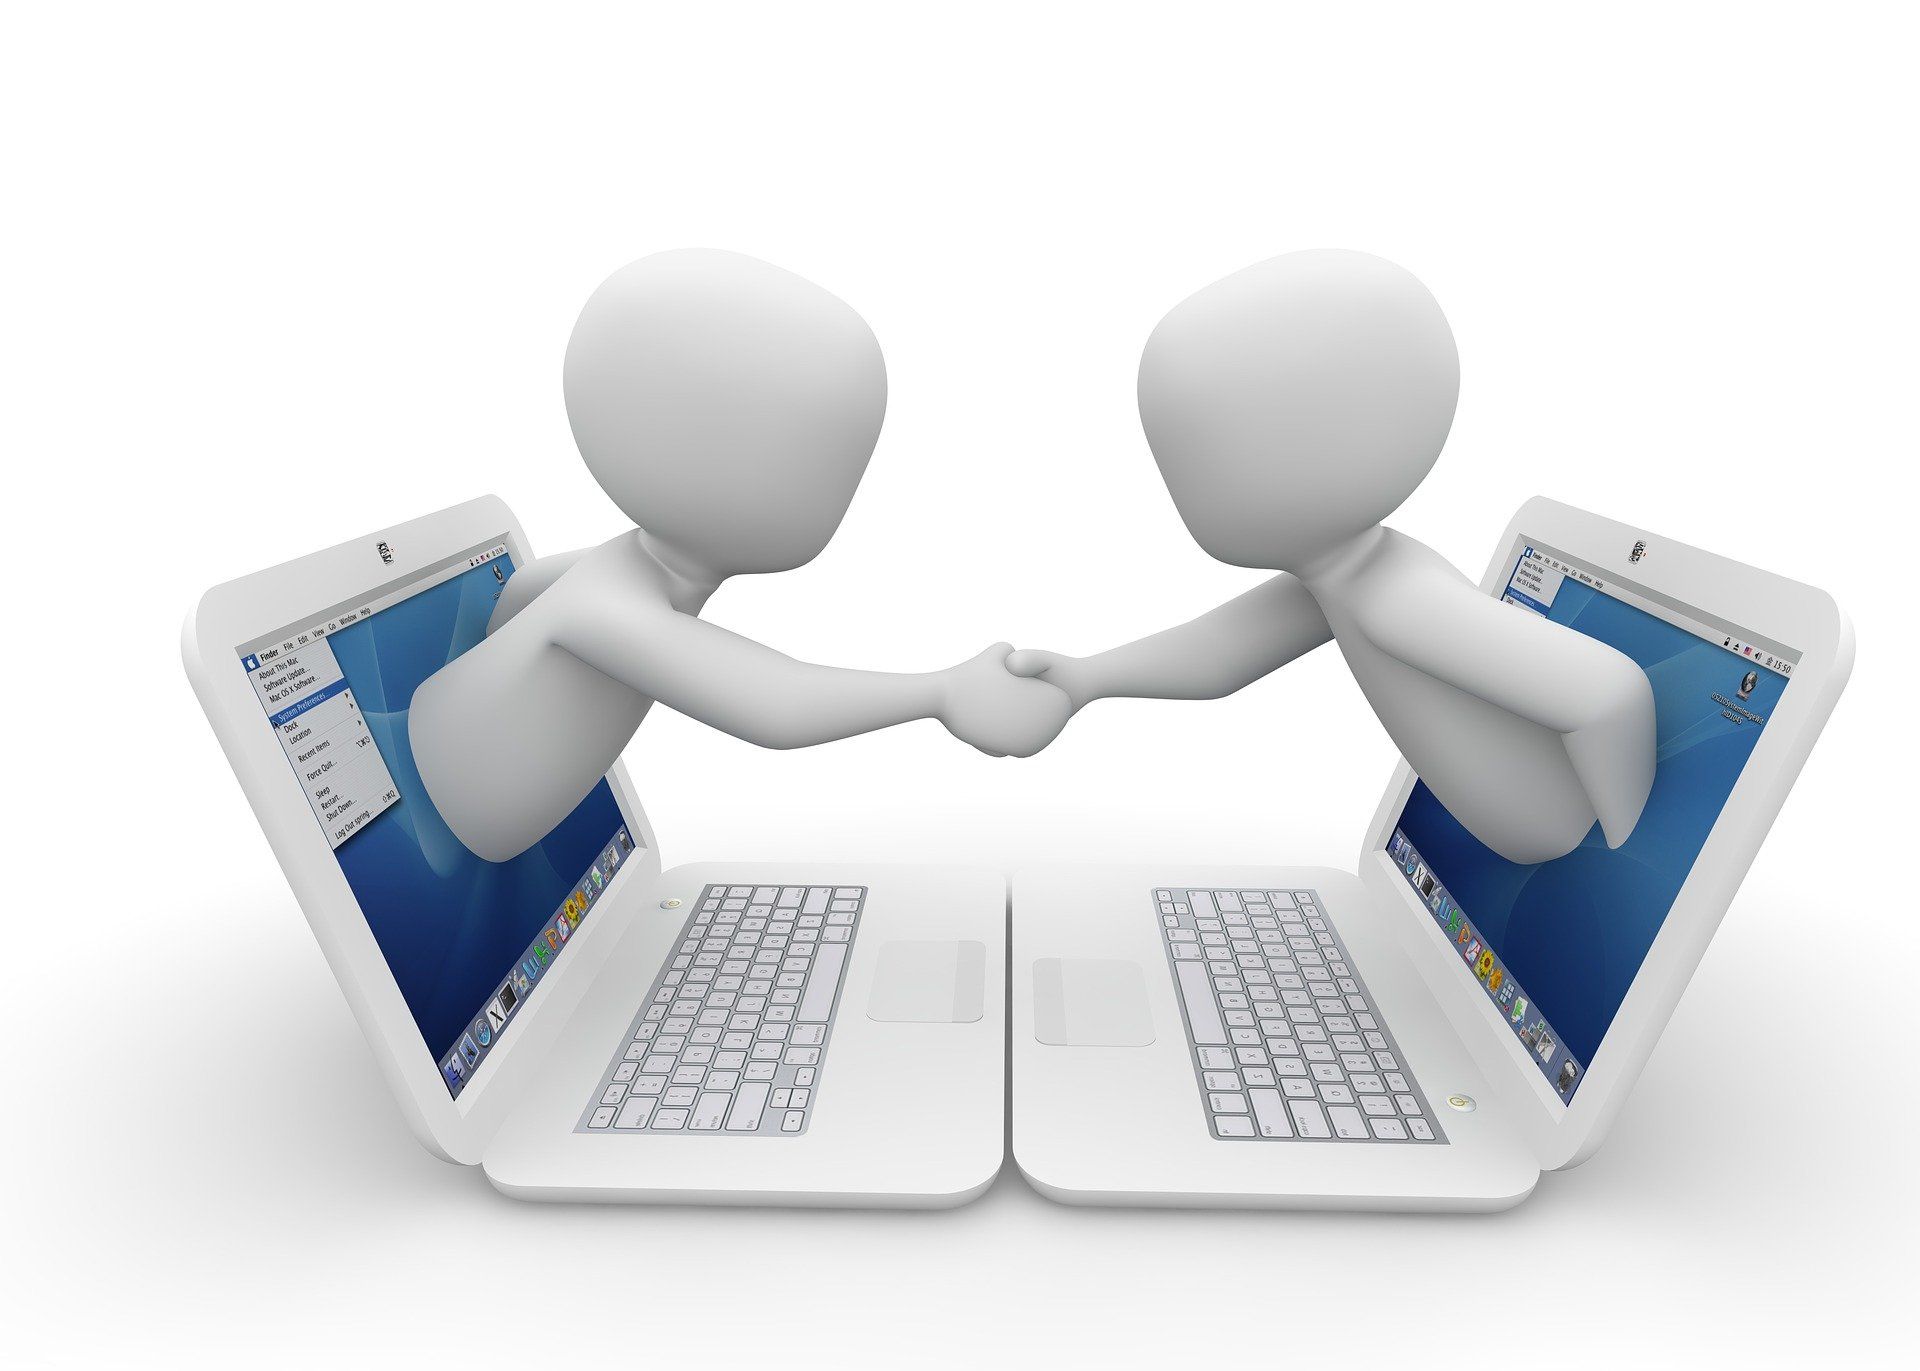 Image of 2 virtual computer personas agreeing to an IT services contract